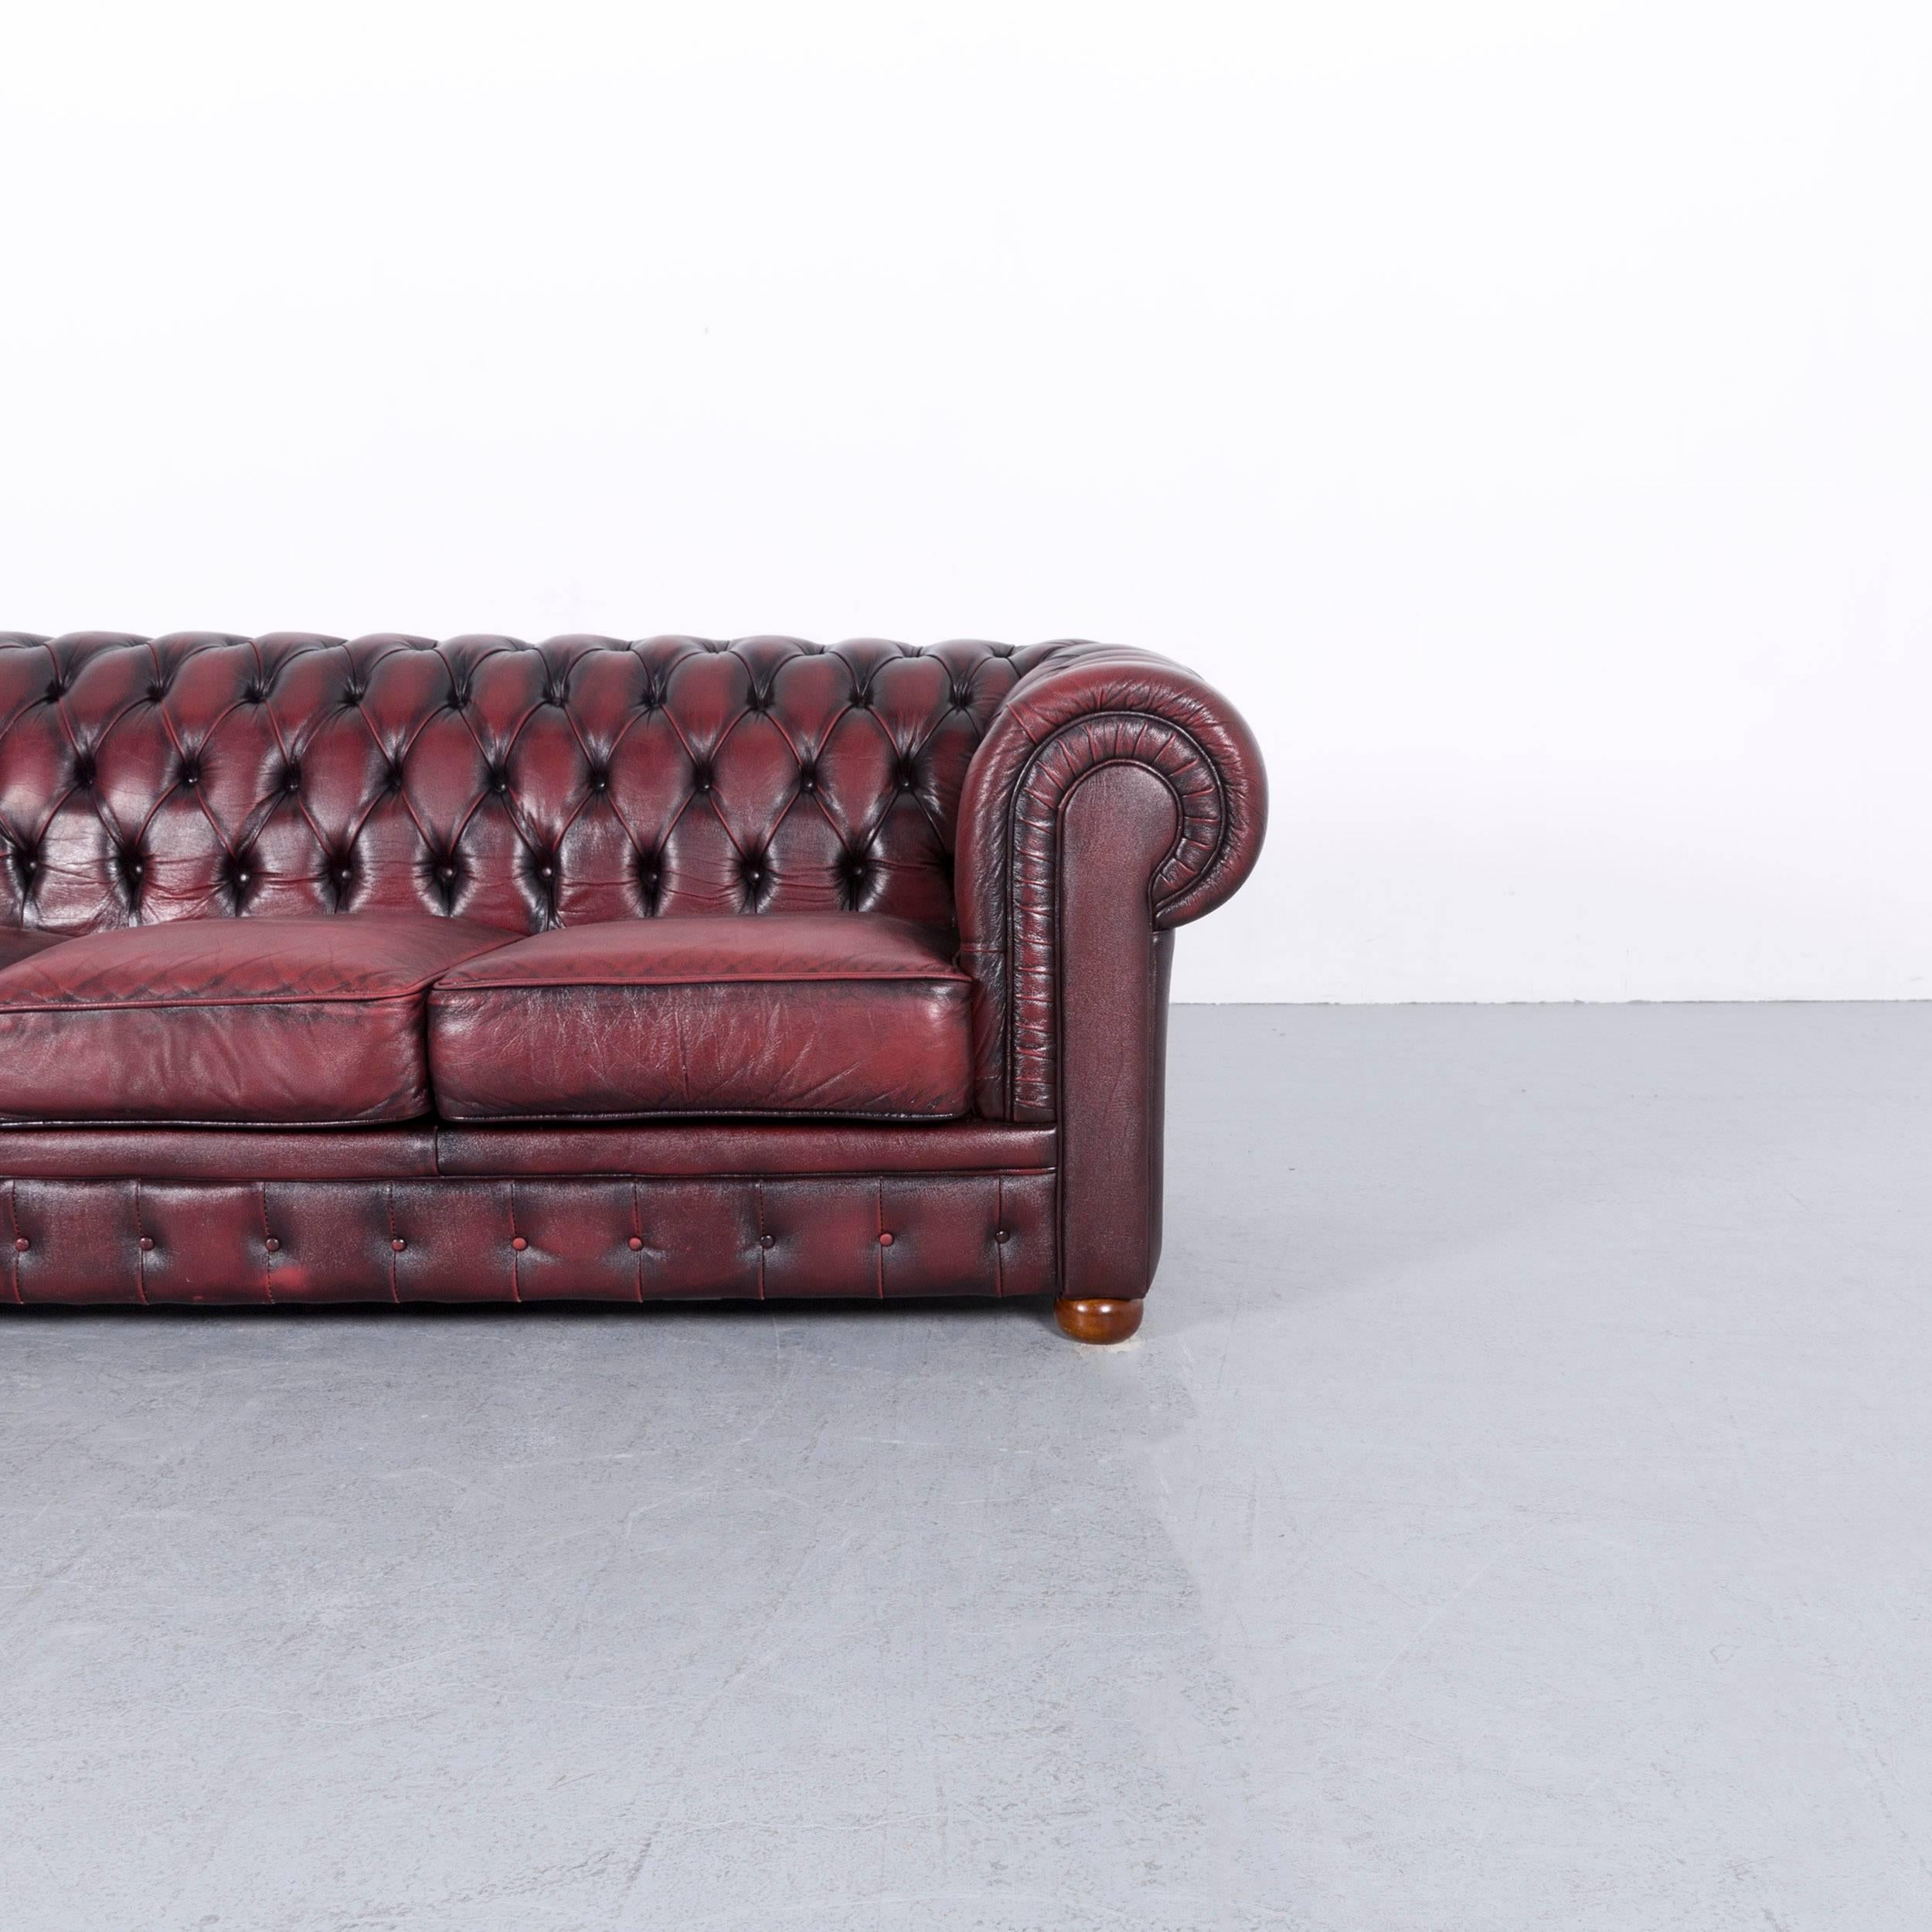 British Chesterfield Leather Sofa Red Three-Seat Couch